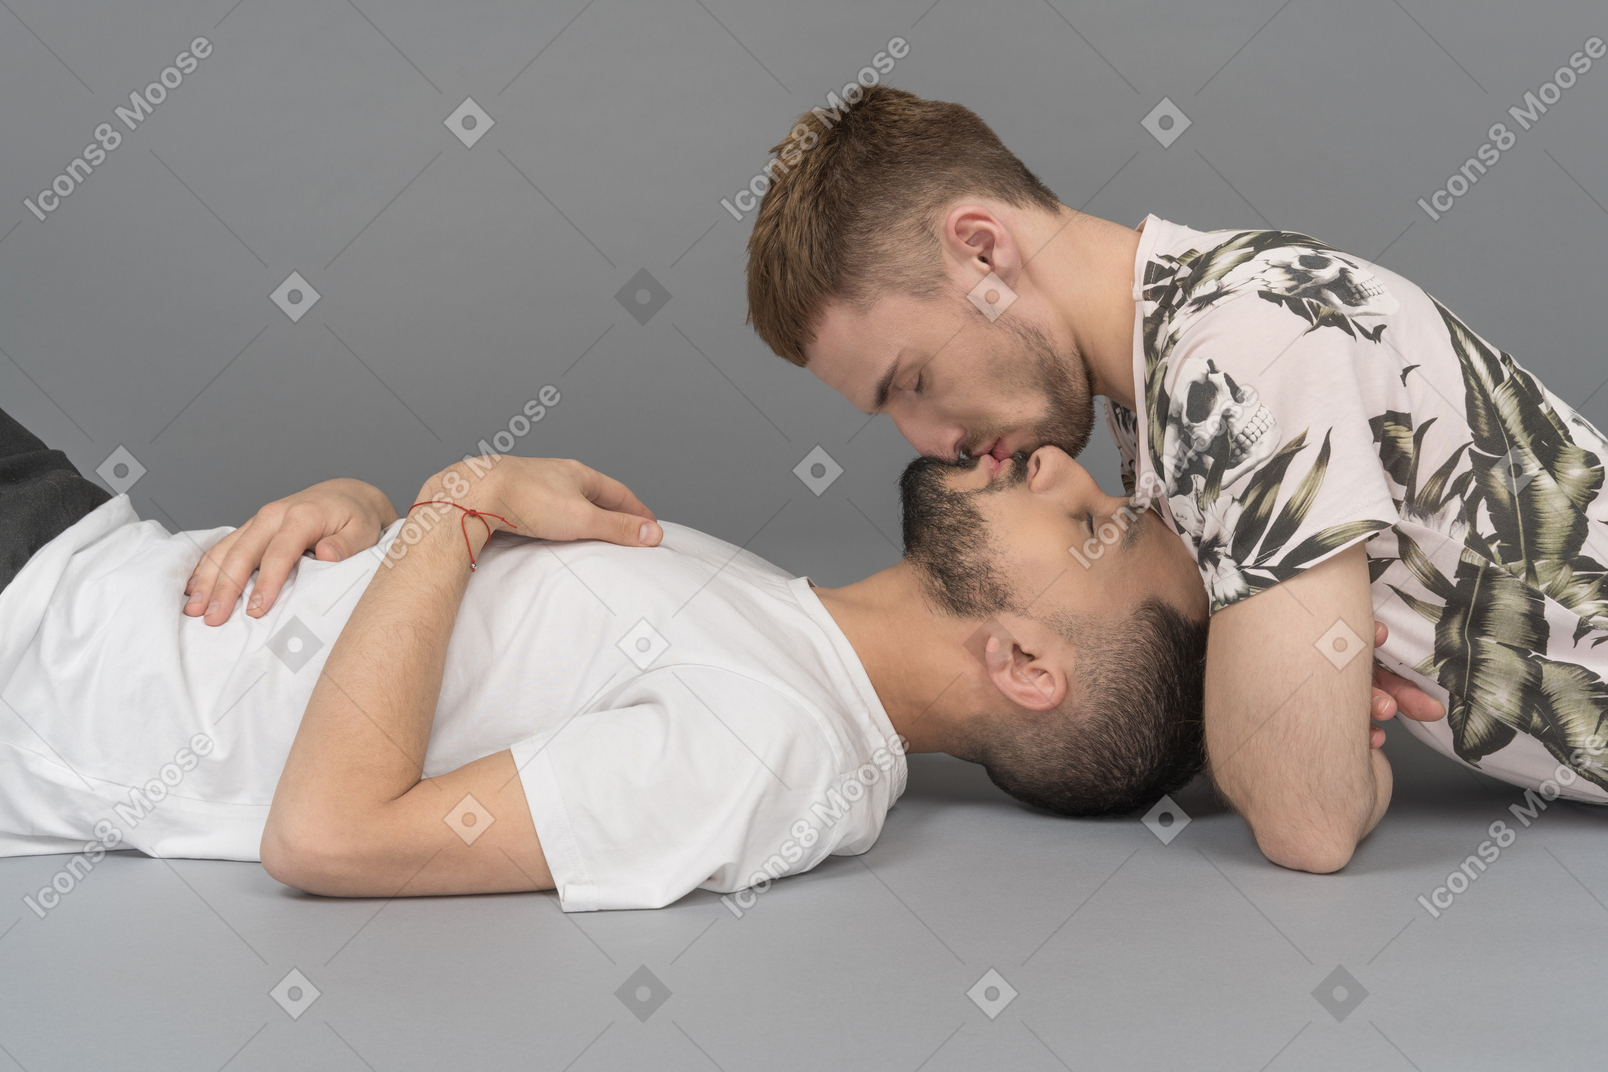 Two young caucasian men lying on the floor one looming over another and kissing gently